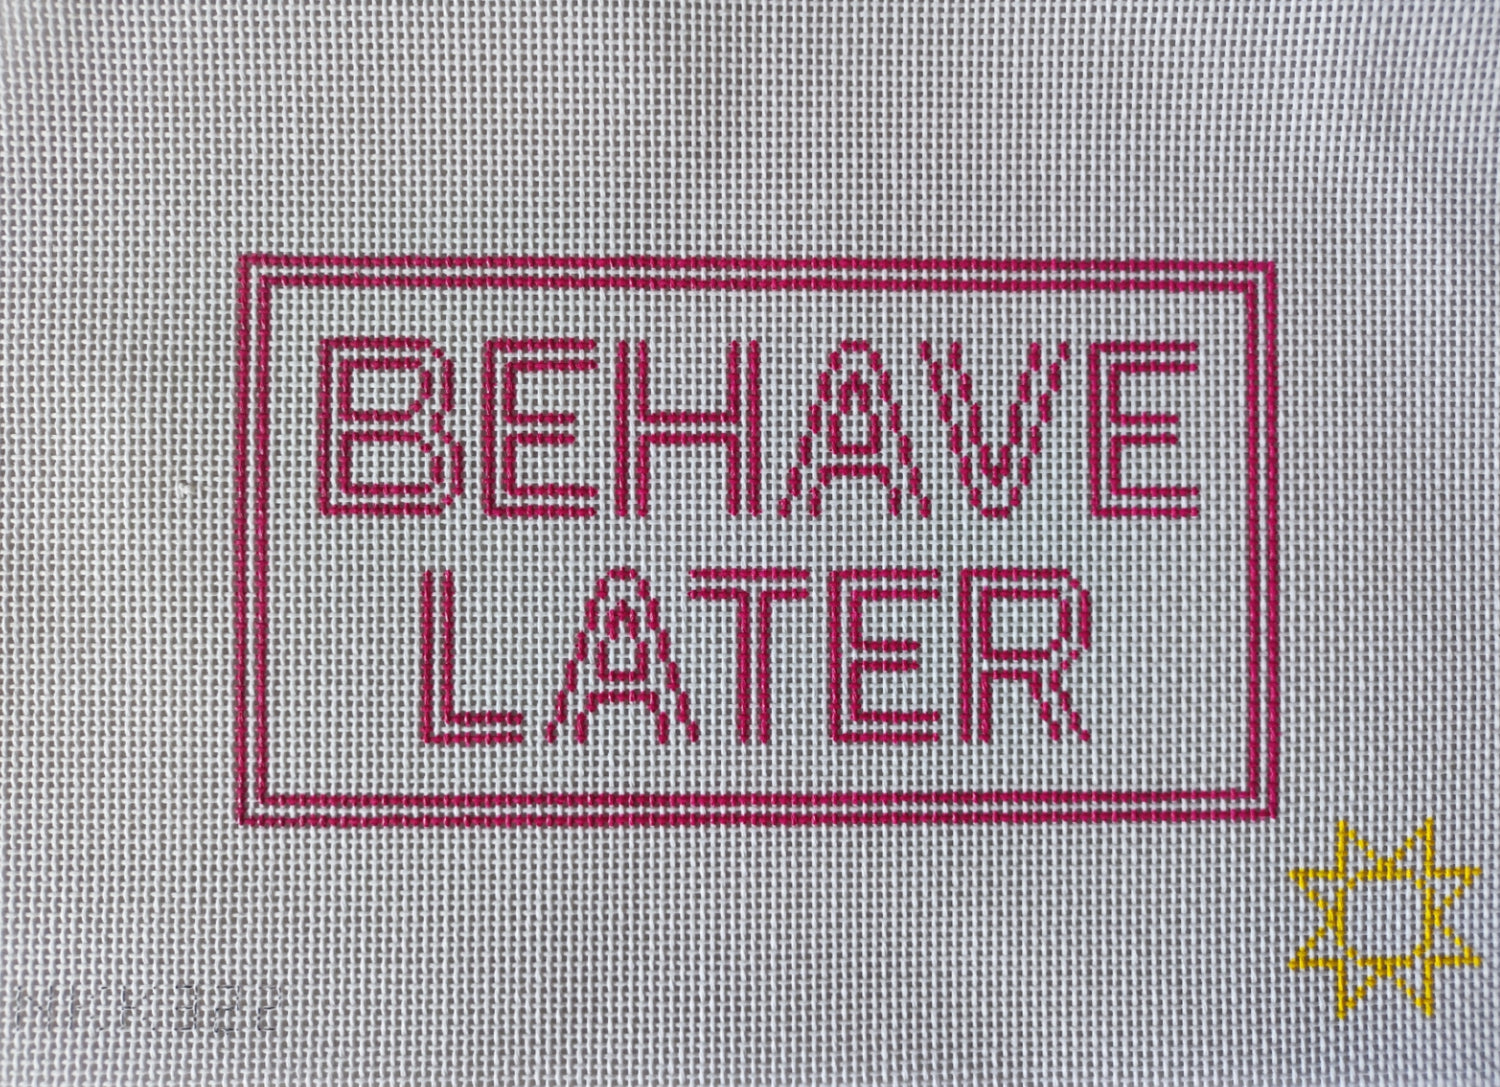 Behave Later